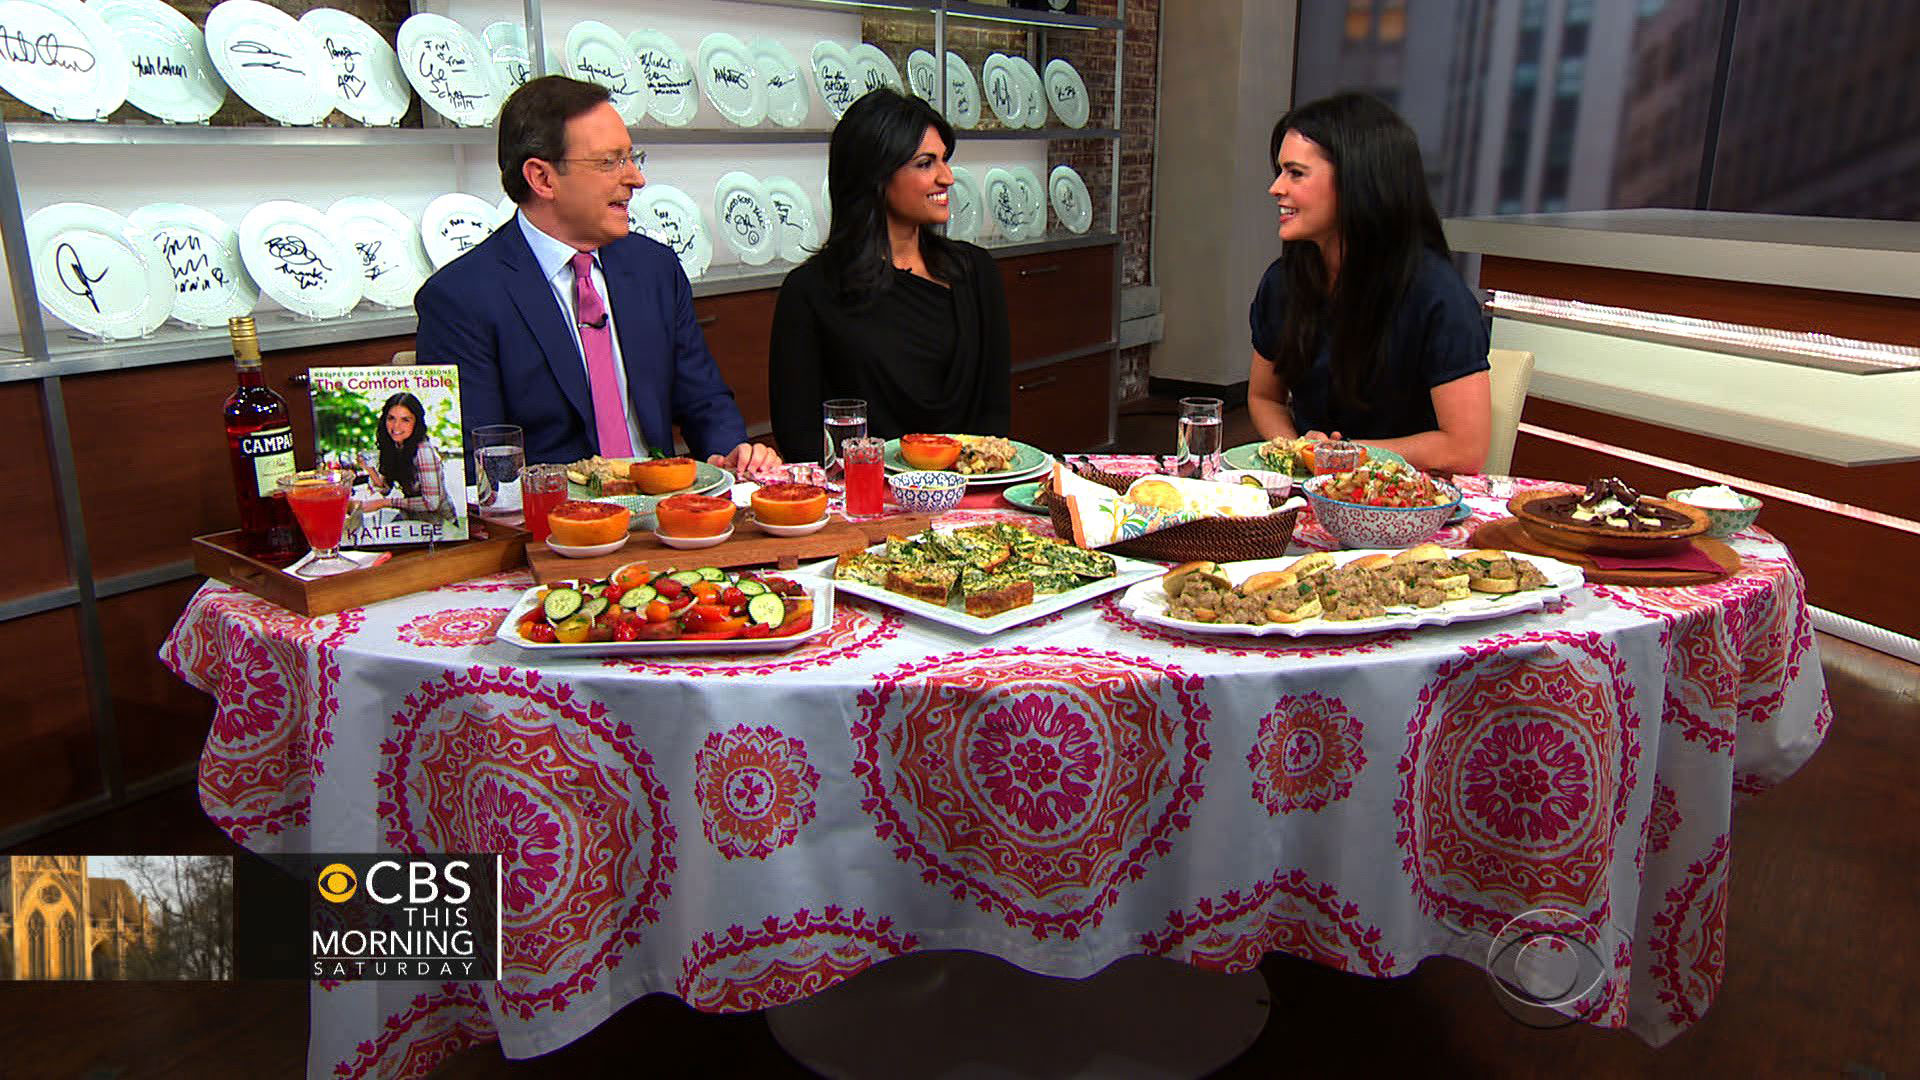 Katie Lee of Food Network's "The Kitchen" shares brunch on THE Dish